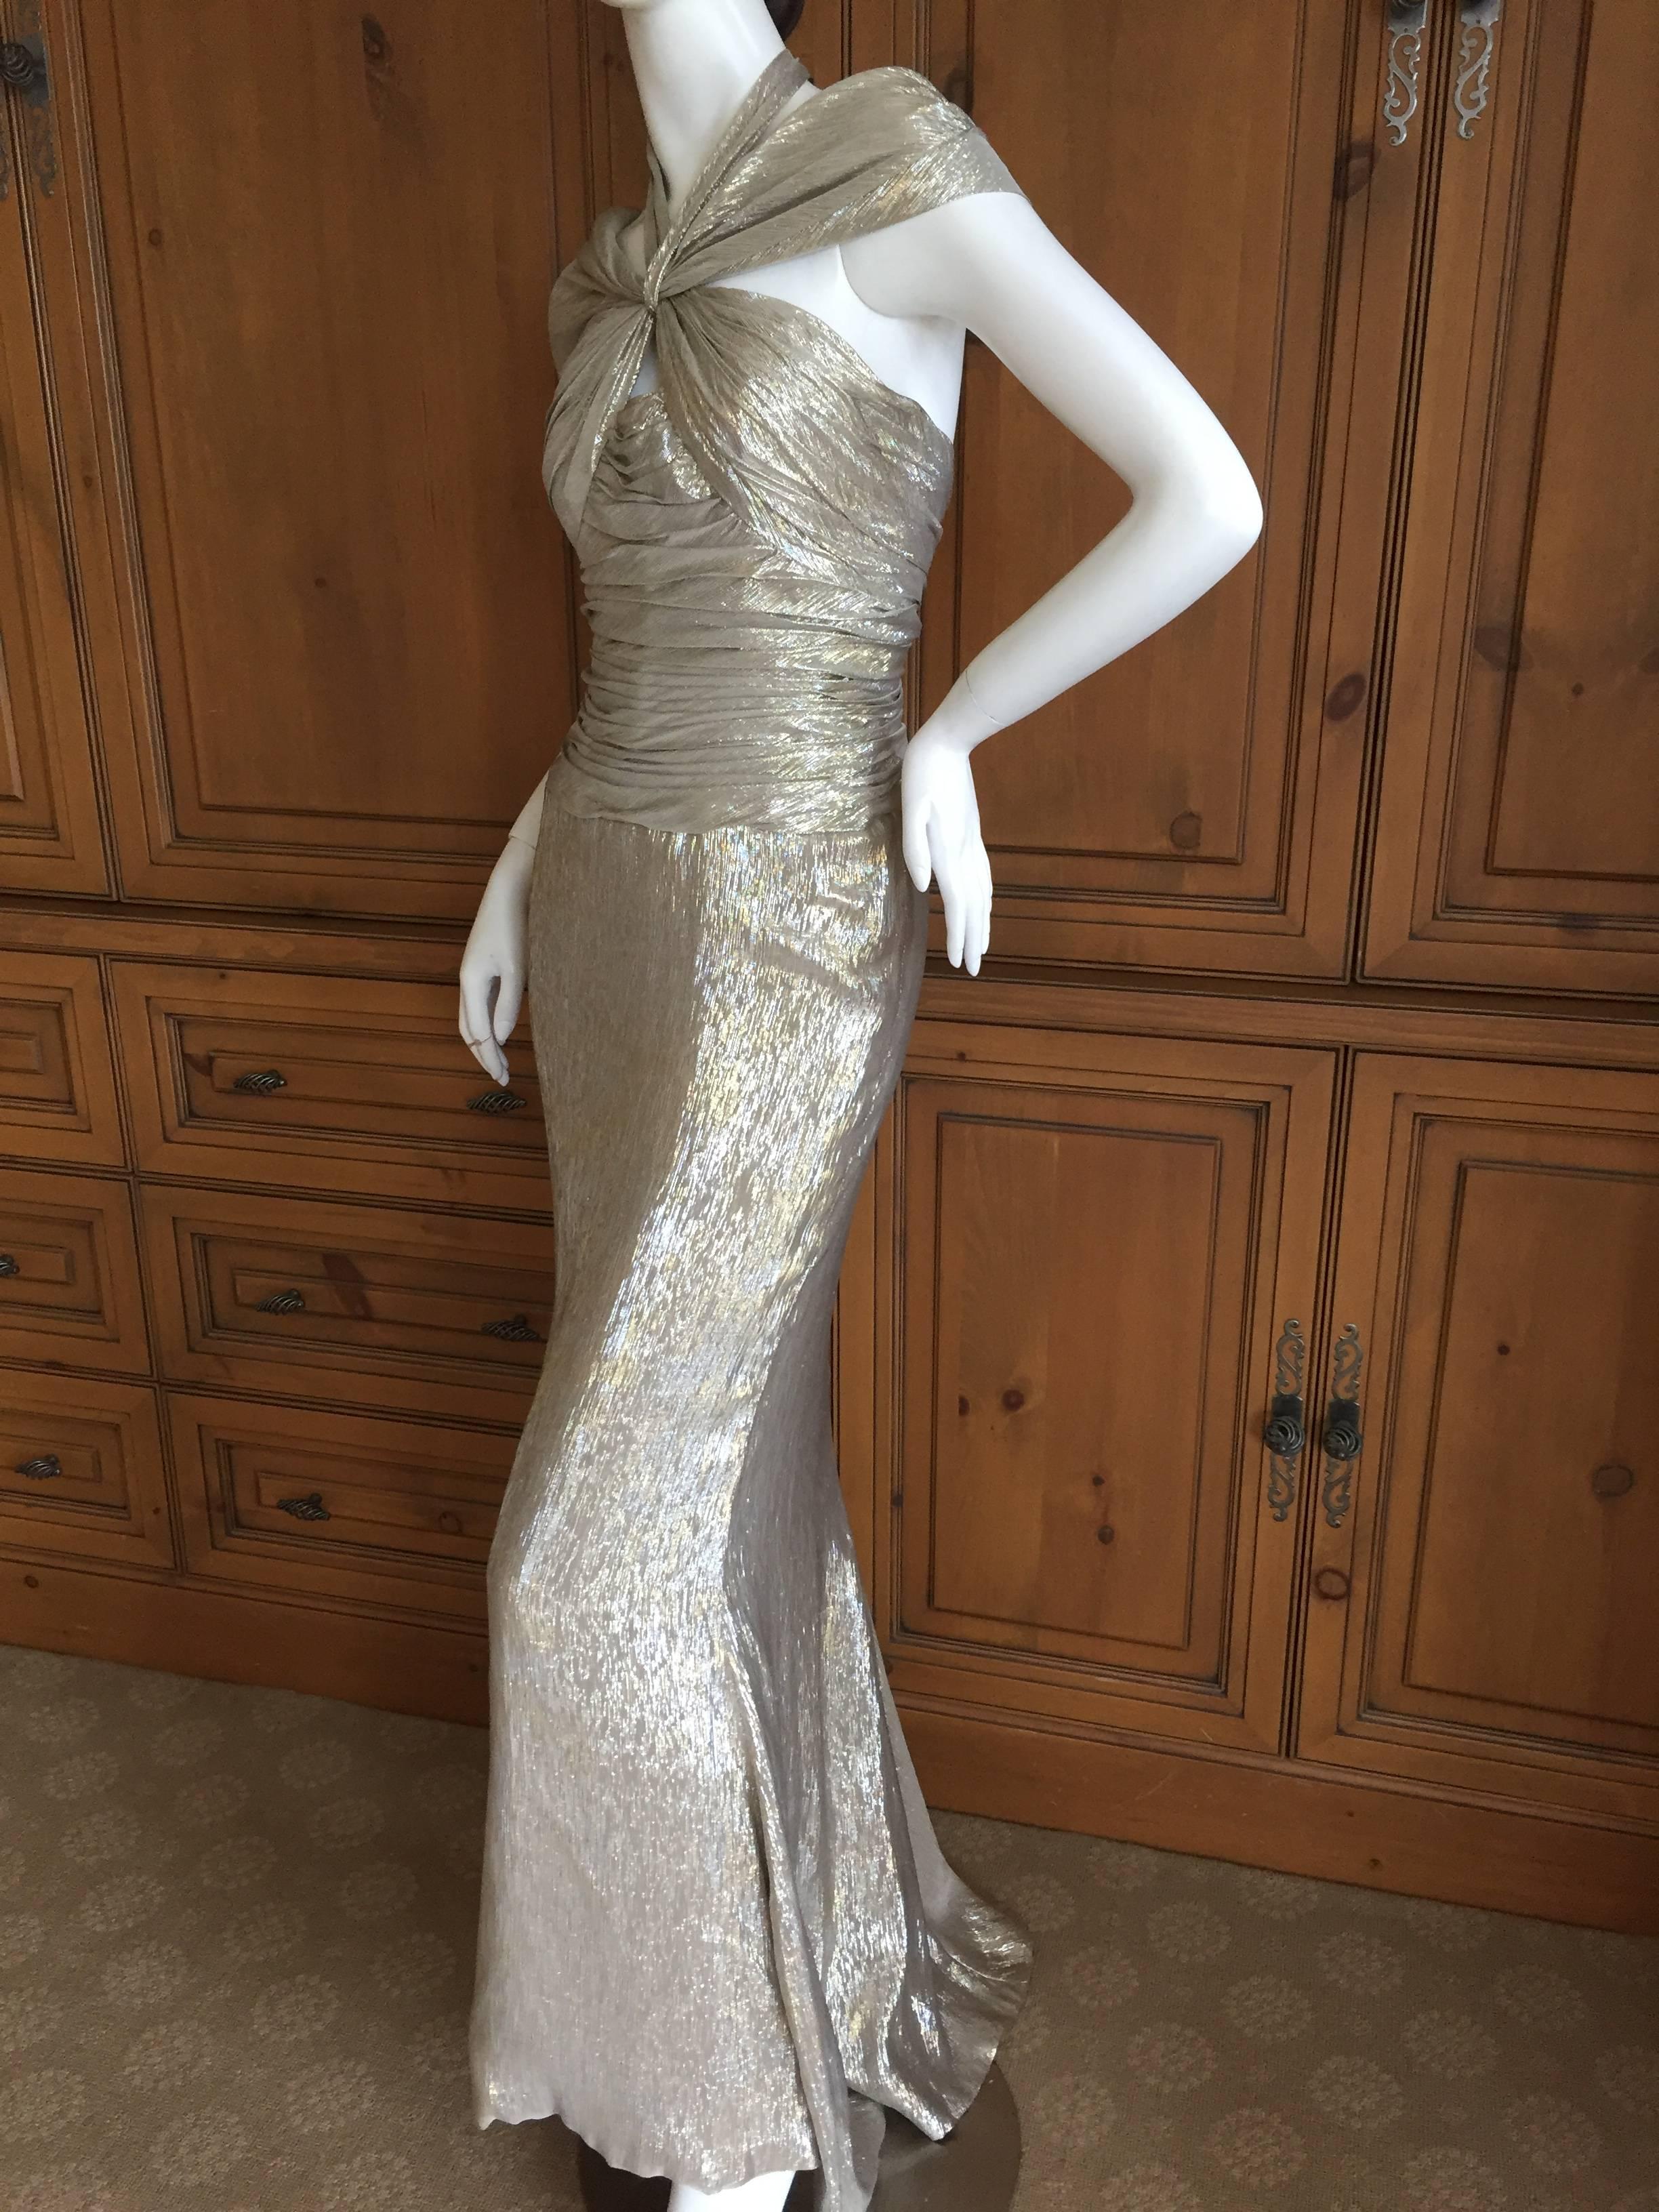 Beautiful Oscar de la Renta Romantic Metallic Silk Siren Gown .
This is such a pretty piece, the photos don't quite capture its charms.
The silk is shot through with gold and silver metallic thread, so pretty.
Size 4
Bust 34